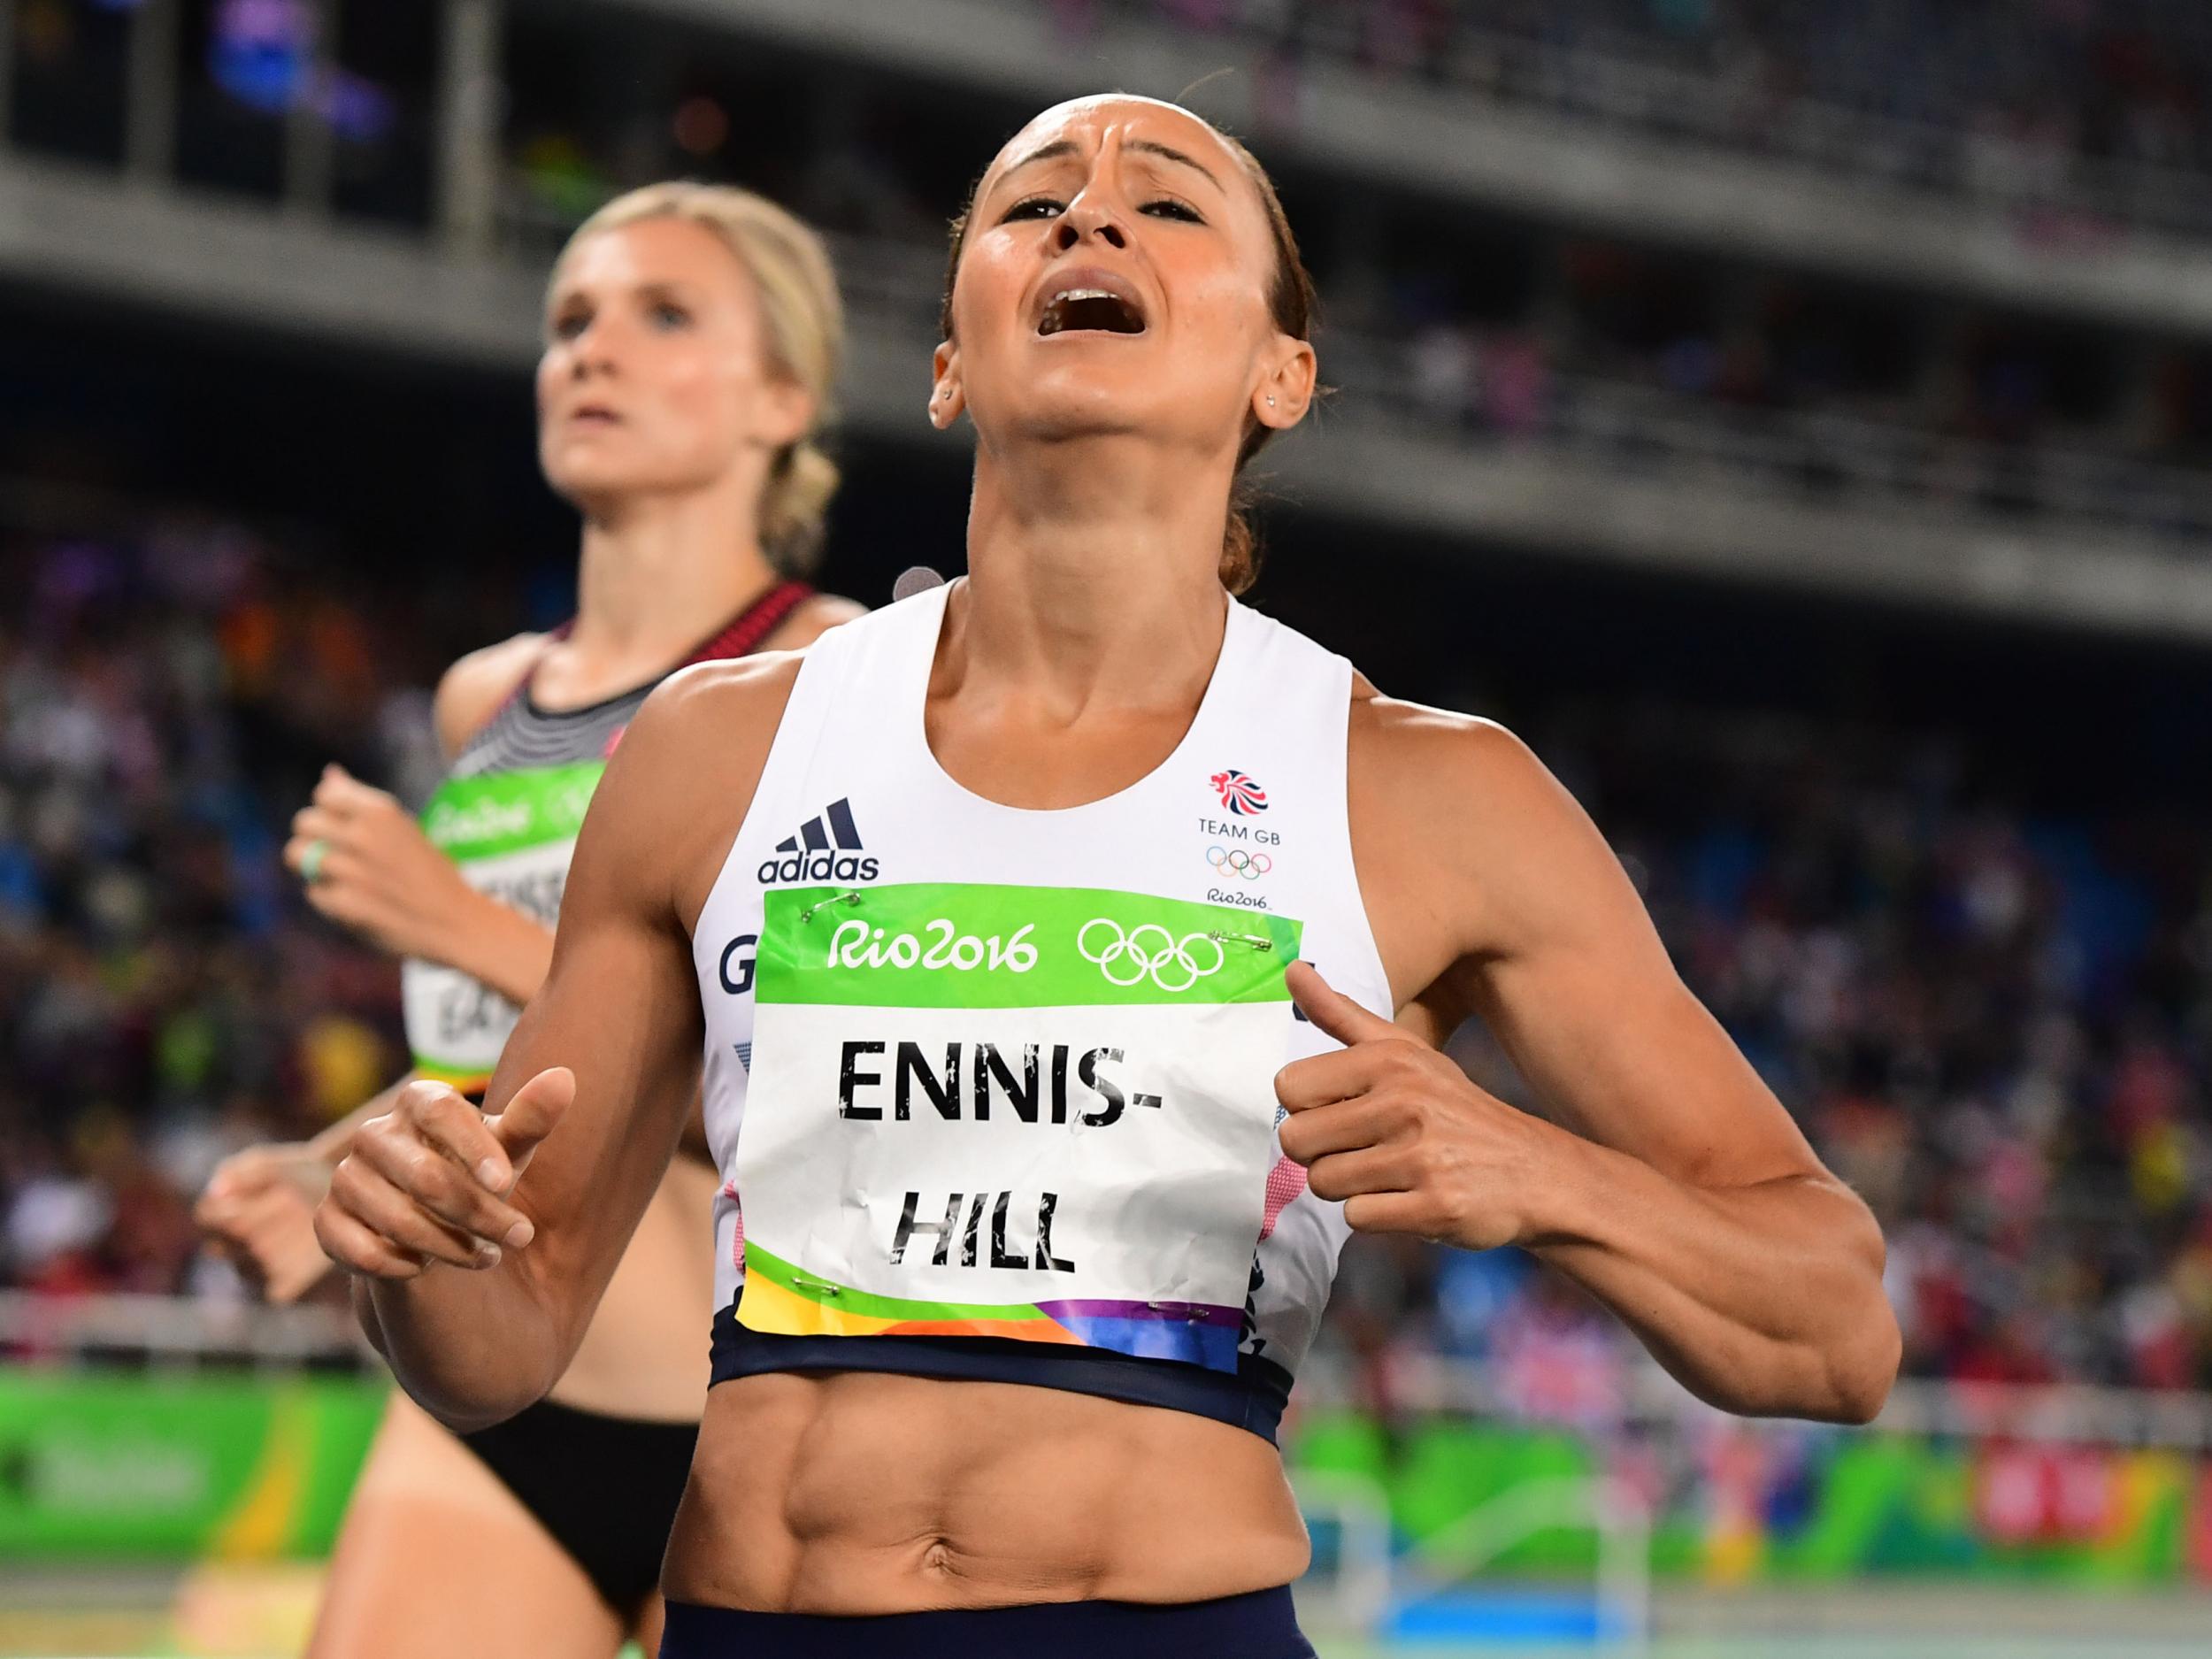 Jessica Ennis-Hill's success has helped encourage more women in sport